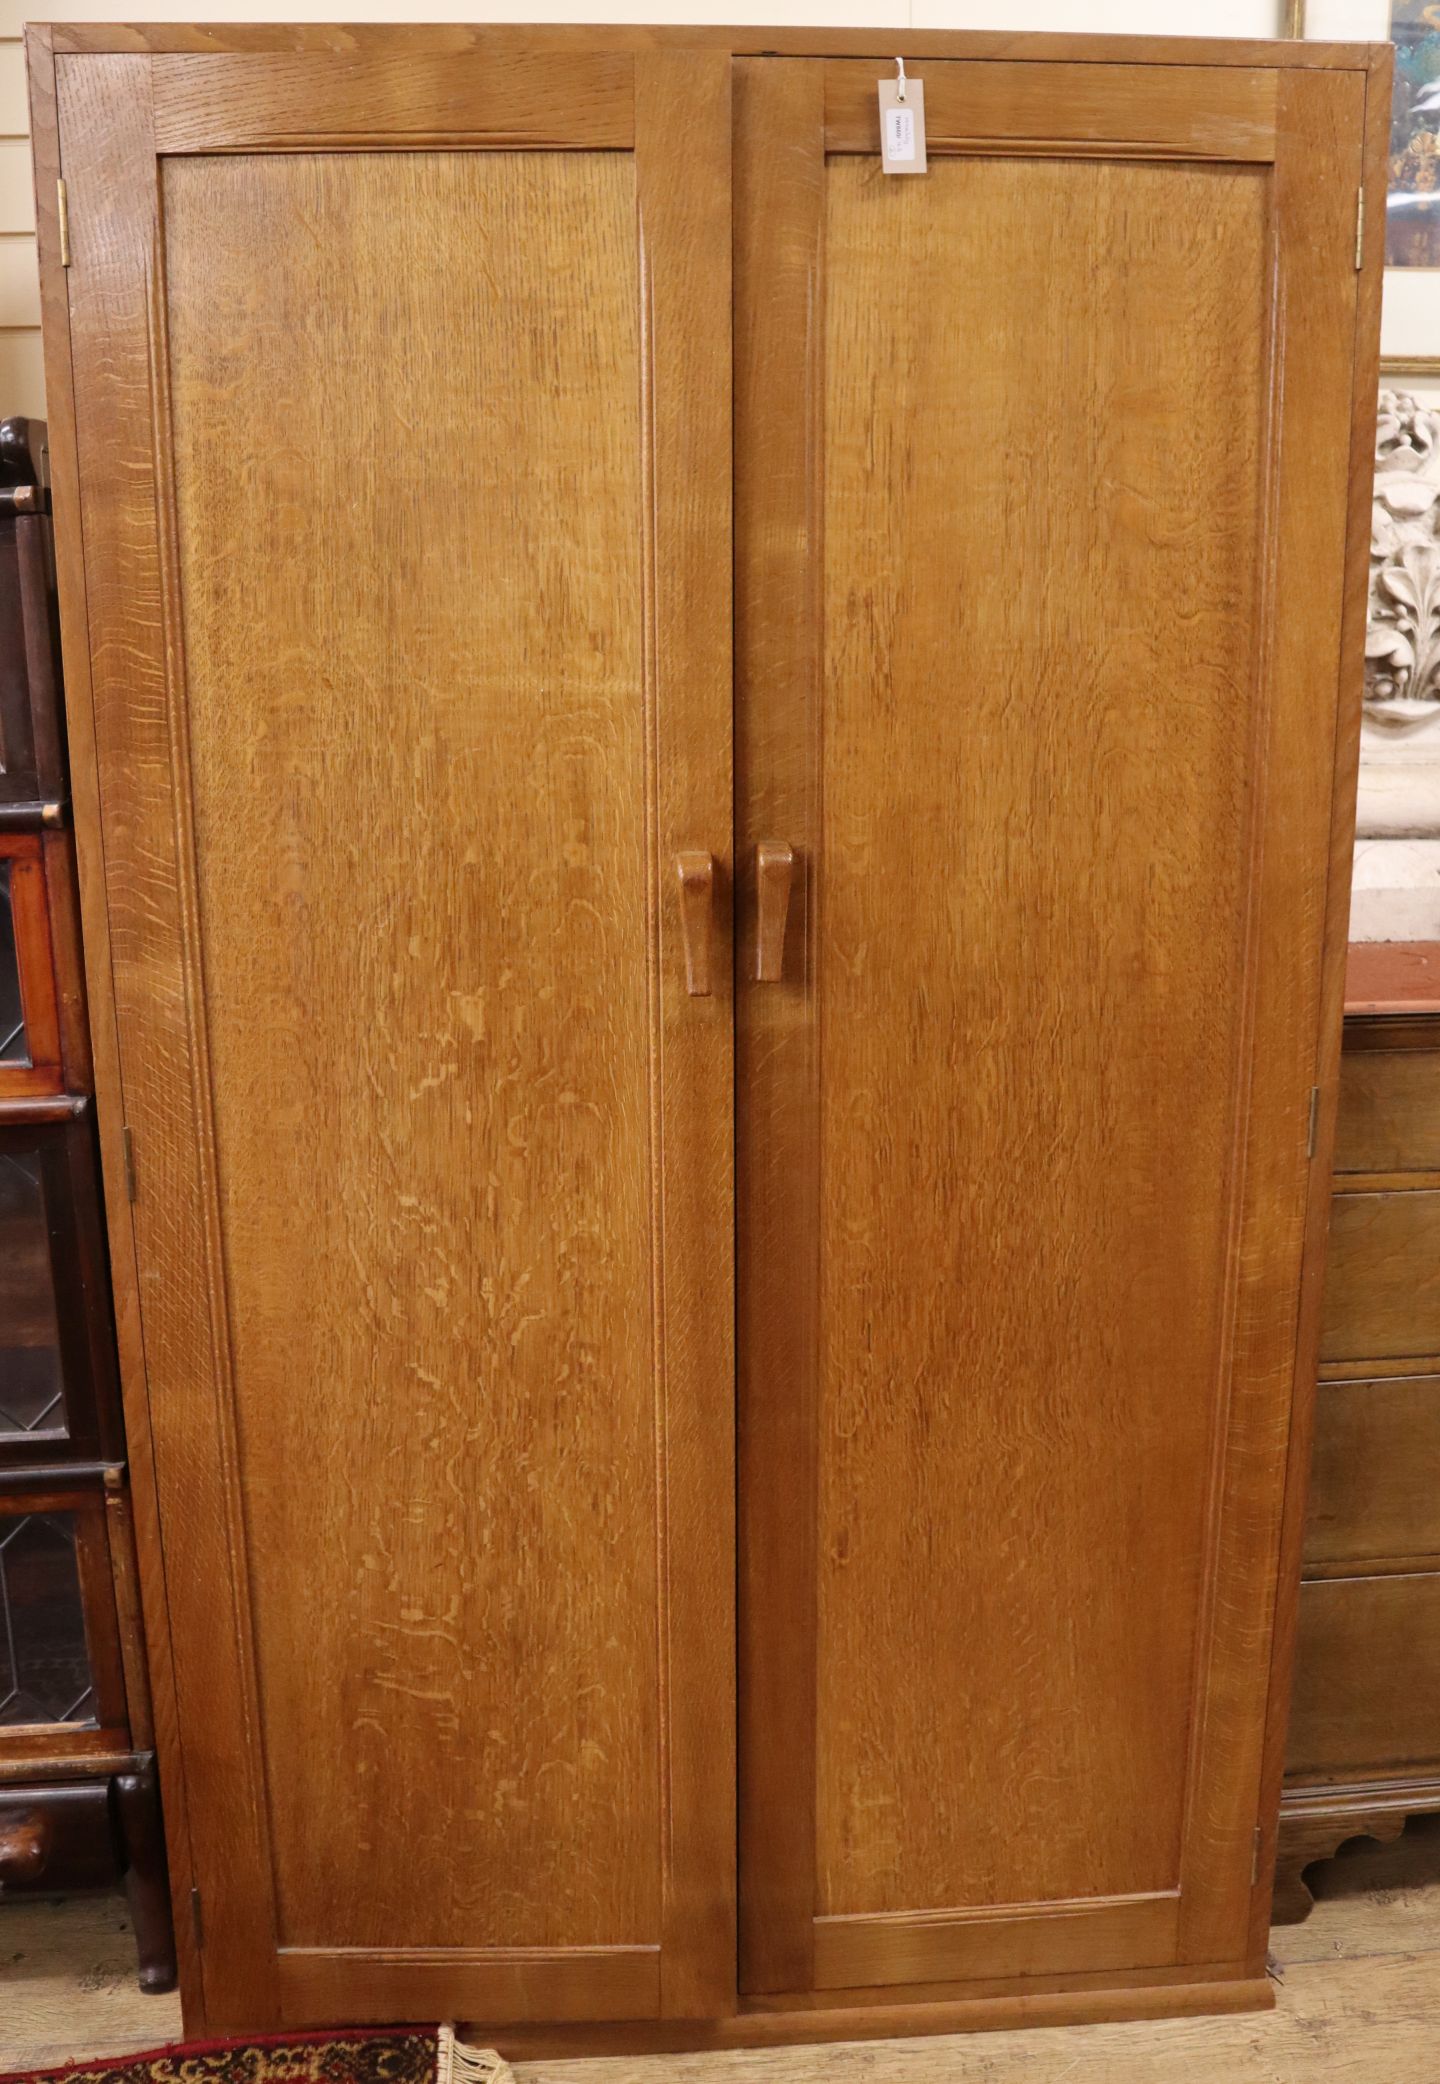 A panelled oak wardrobe and a matching night stand (reputed to be the work of John Skelton) Wardrobe